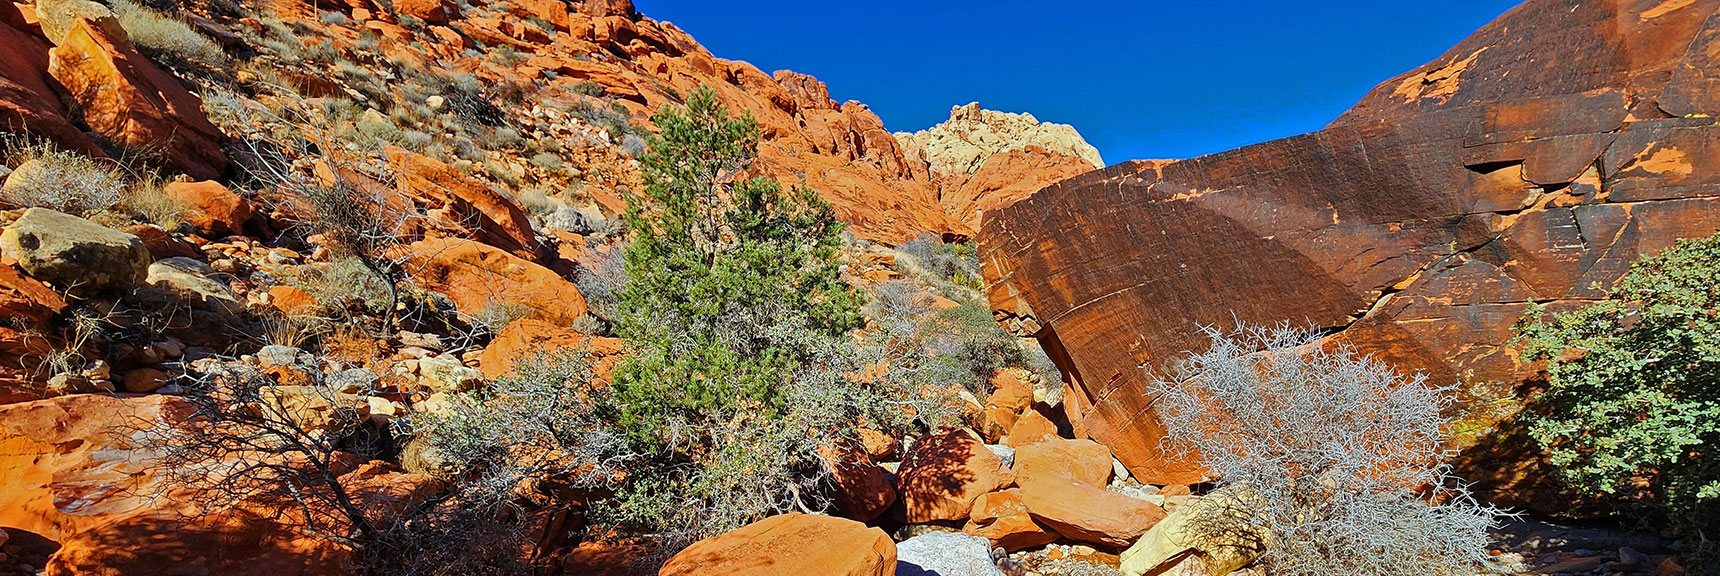 Boulders and Brush are Easy to Navigate...At First! | Upper Calico Hills Loop | Calico Basin and Red Rock Canyon, Nevada